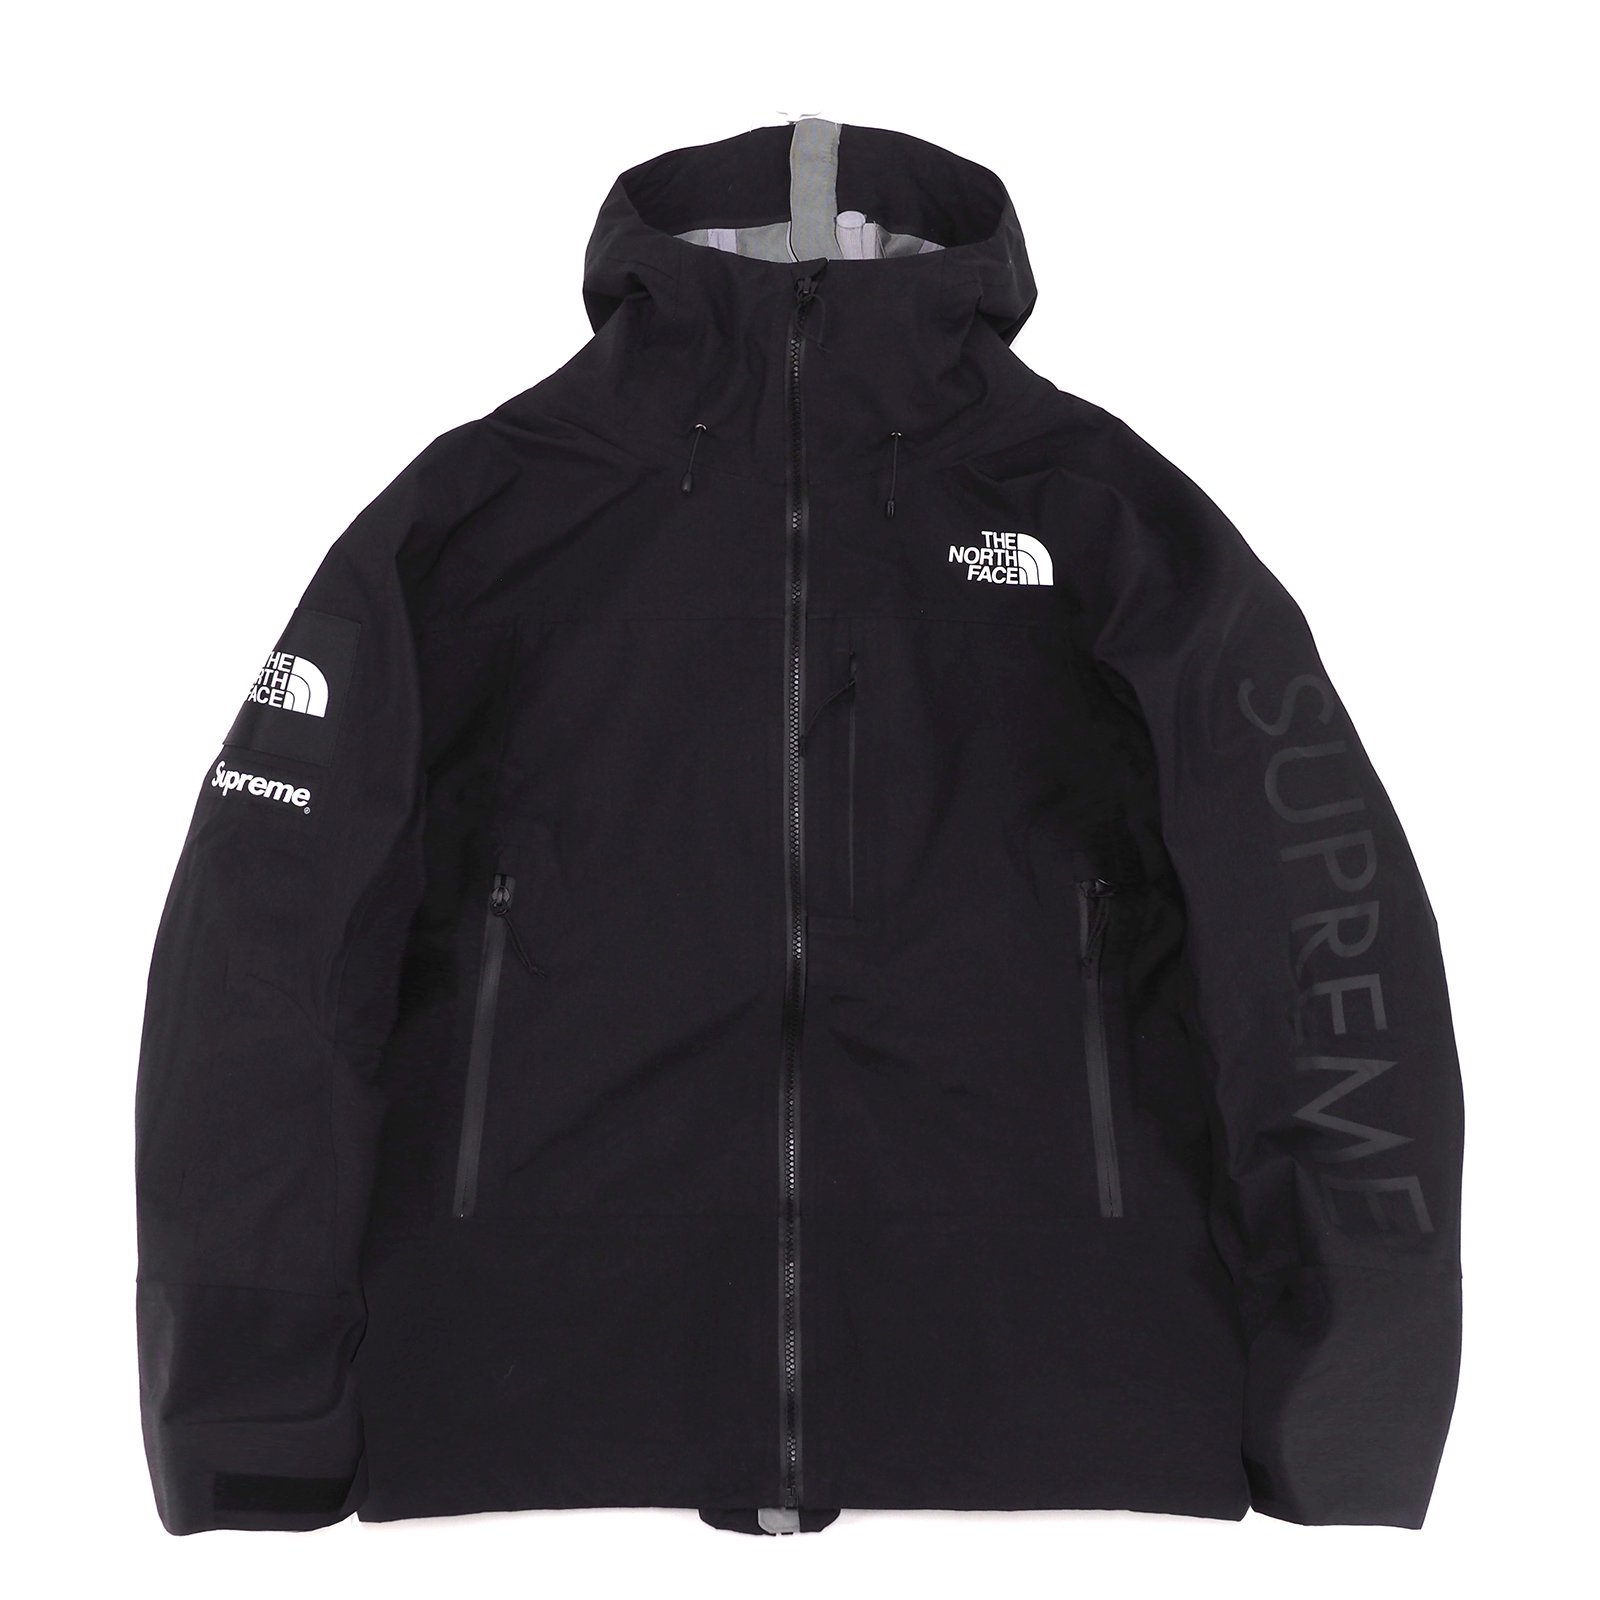 SupSupreme The North Face Shell Jacket xxl